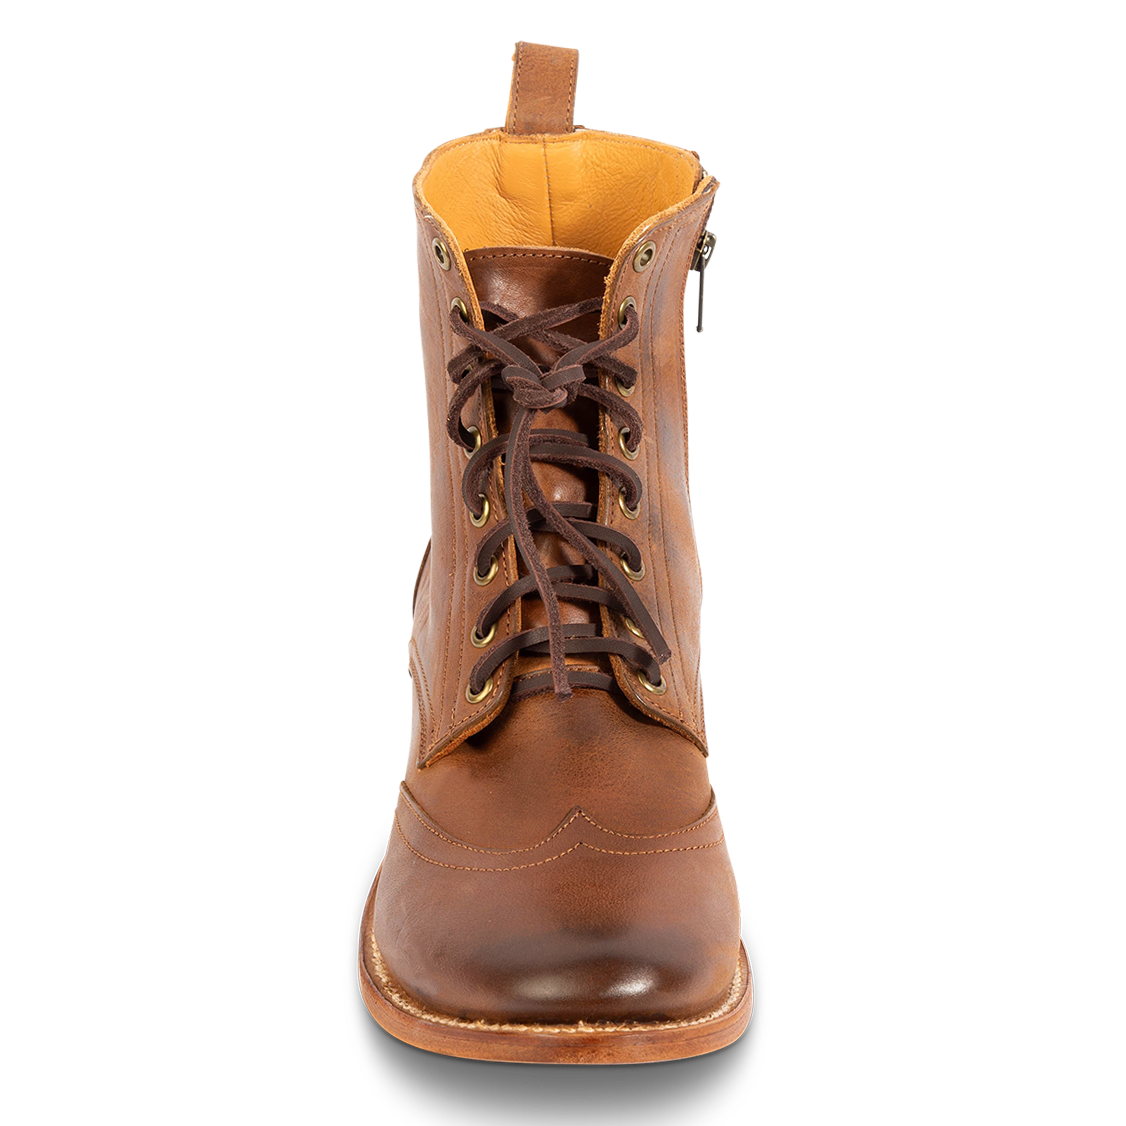 Front view showing functional leather lacing, an almond toe and front stitch detailing on FREEBIRD men's Bodie brown leather boot